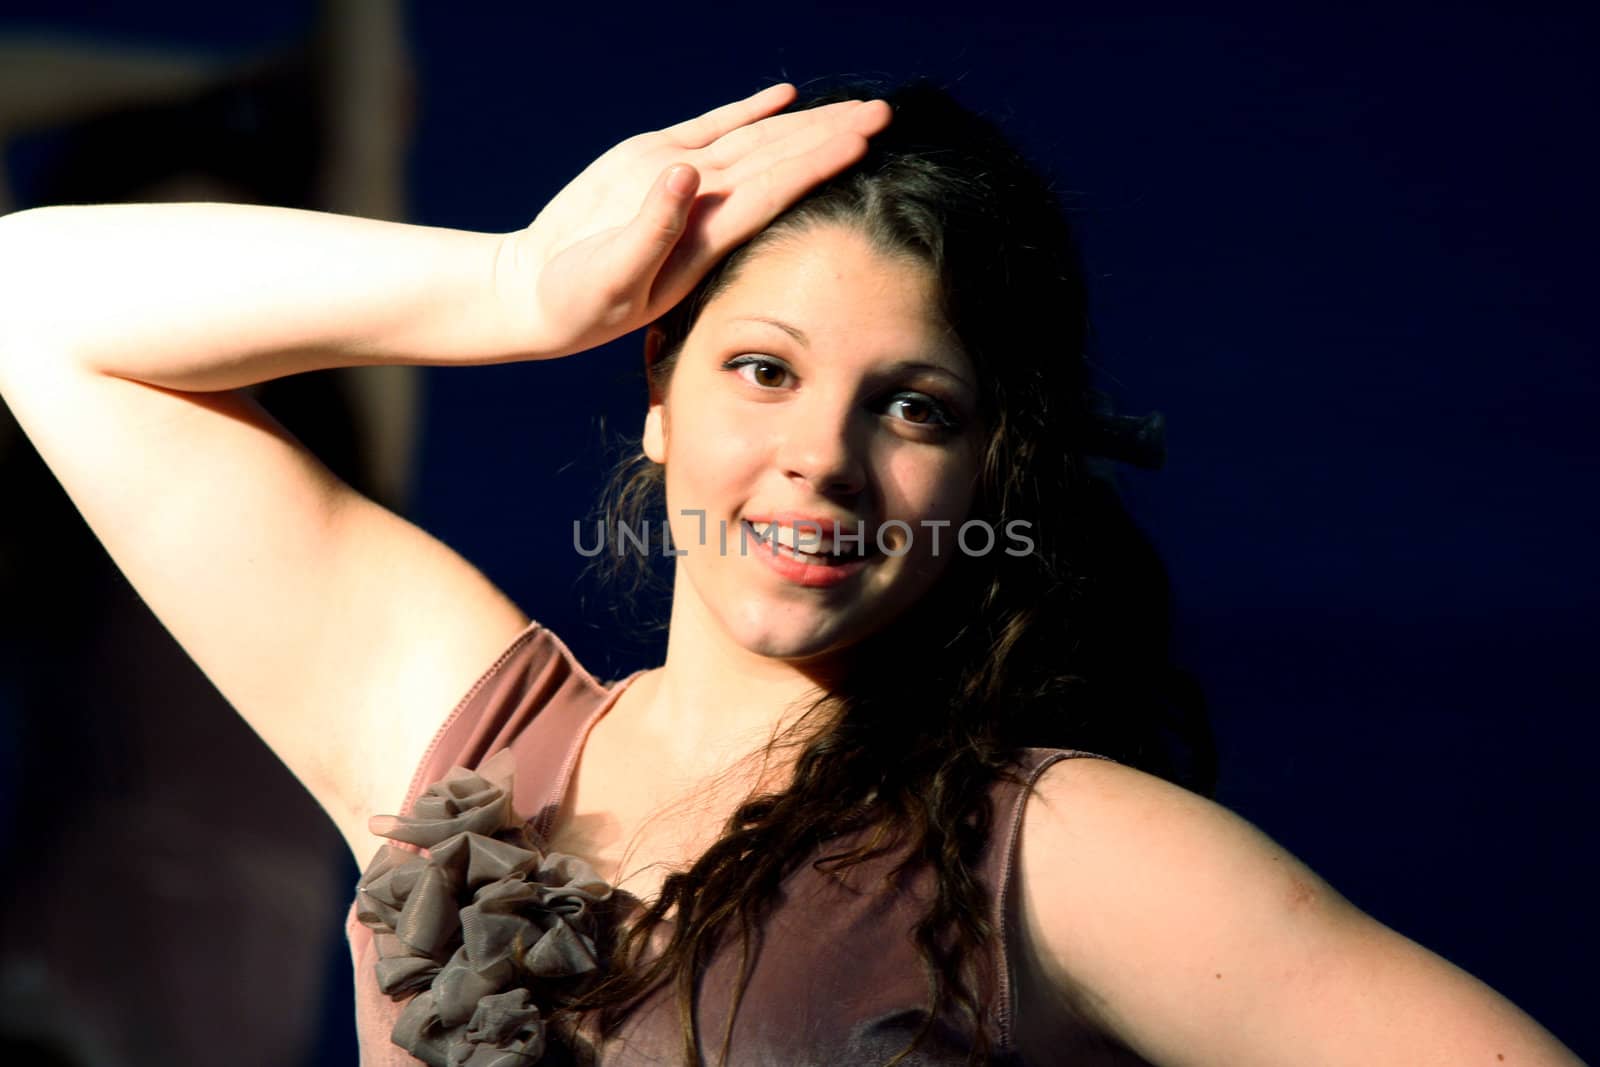 Zrenjanin, Serbia, March 23, 2013: A contestant at Serbian Open Dance Competition in Zrenjanin, Serbia. Photo taken on March 23, 2013